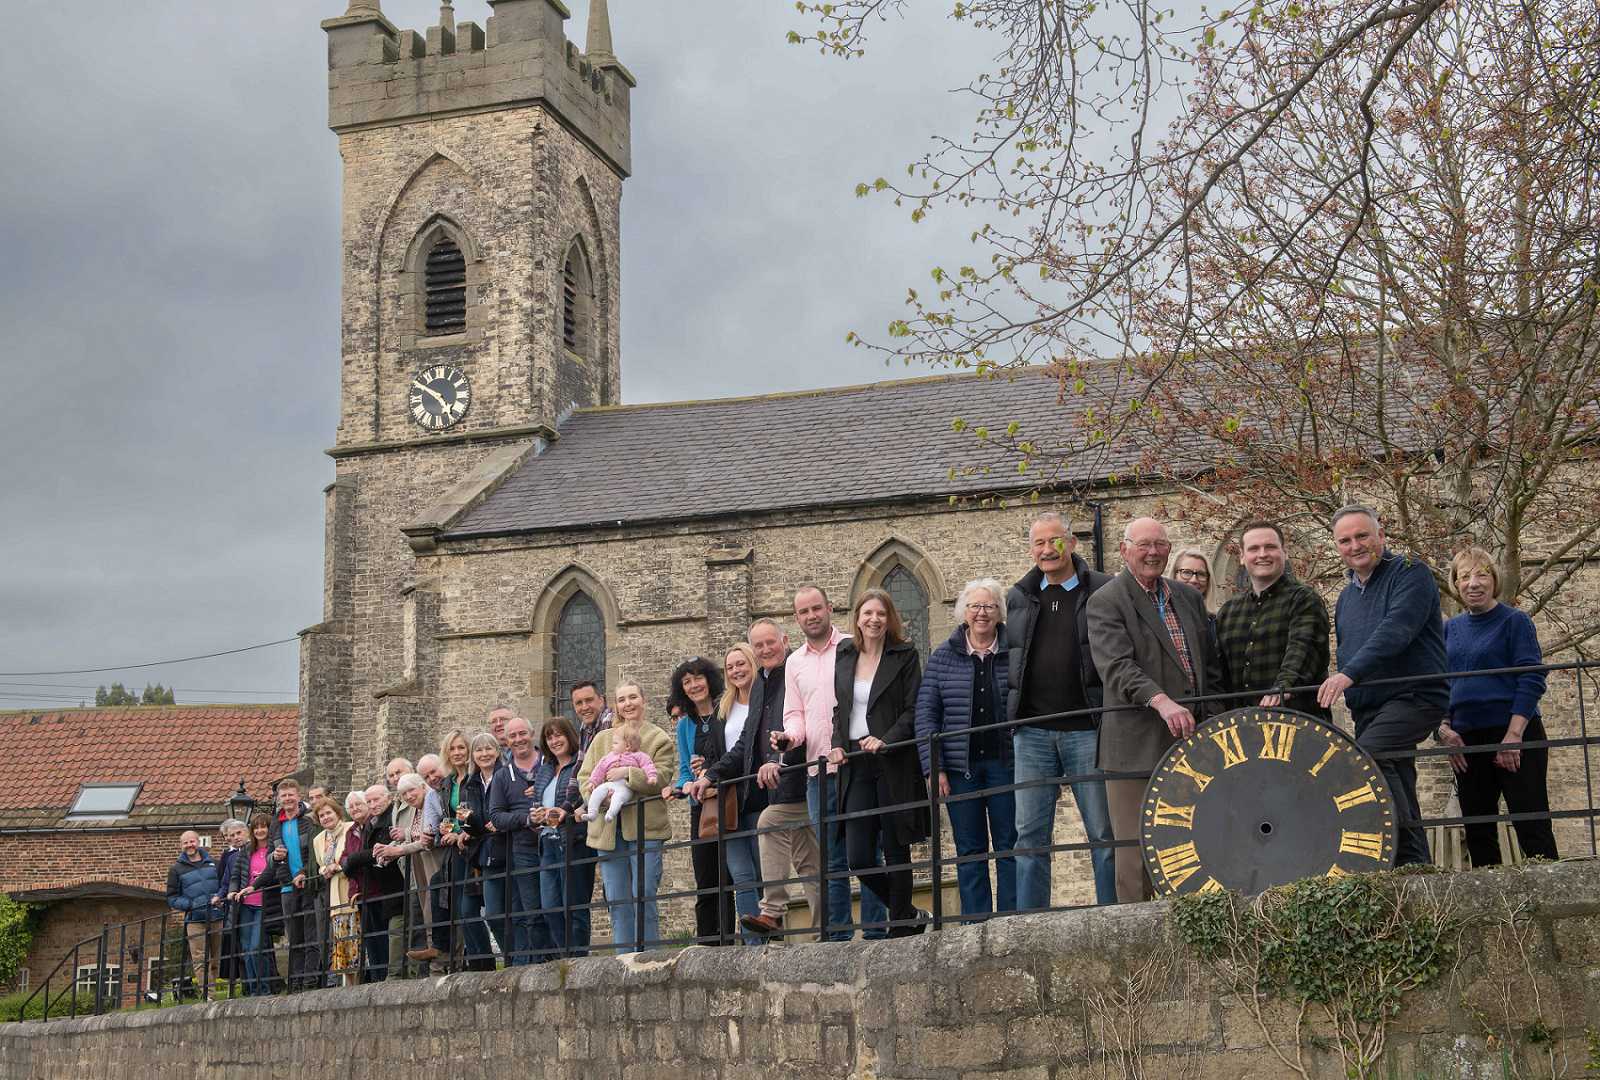 Taken at the community event to celebrate the unveiling of the refurbished church clock